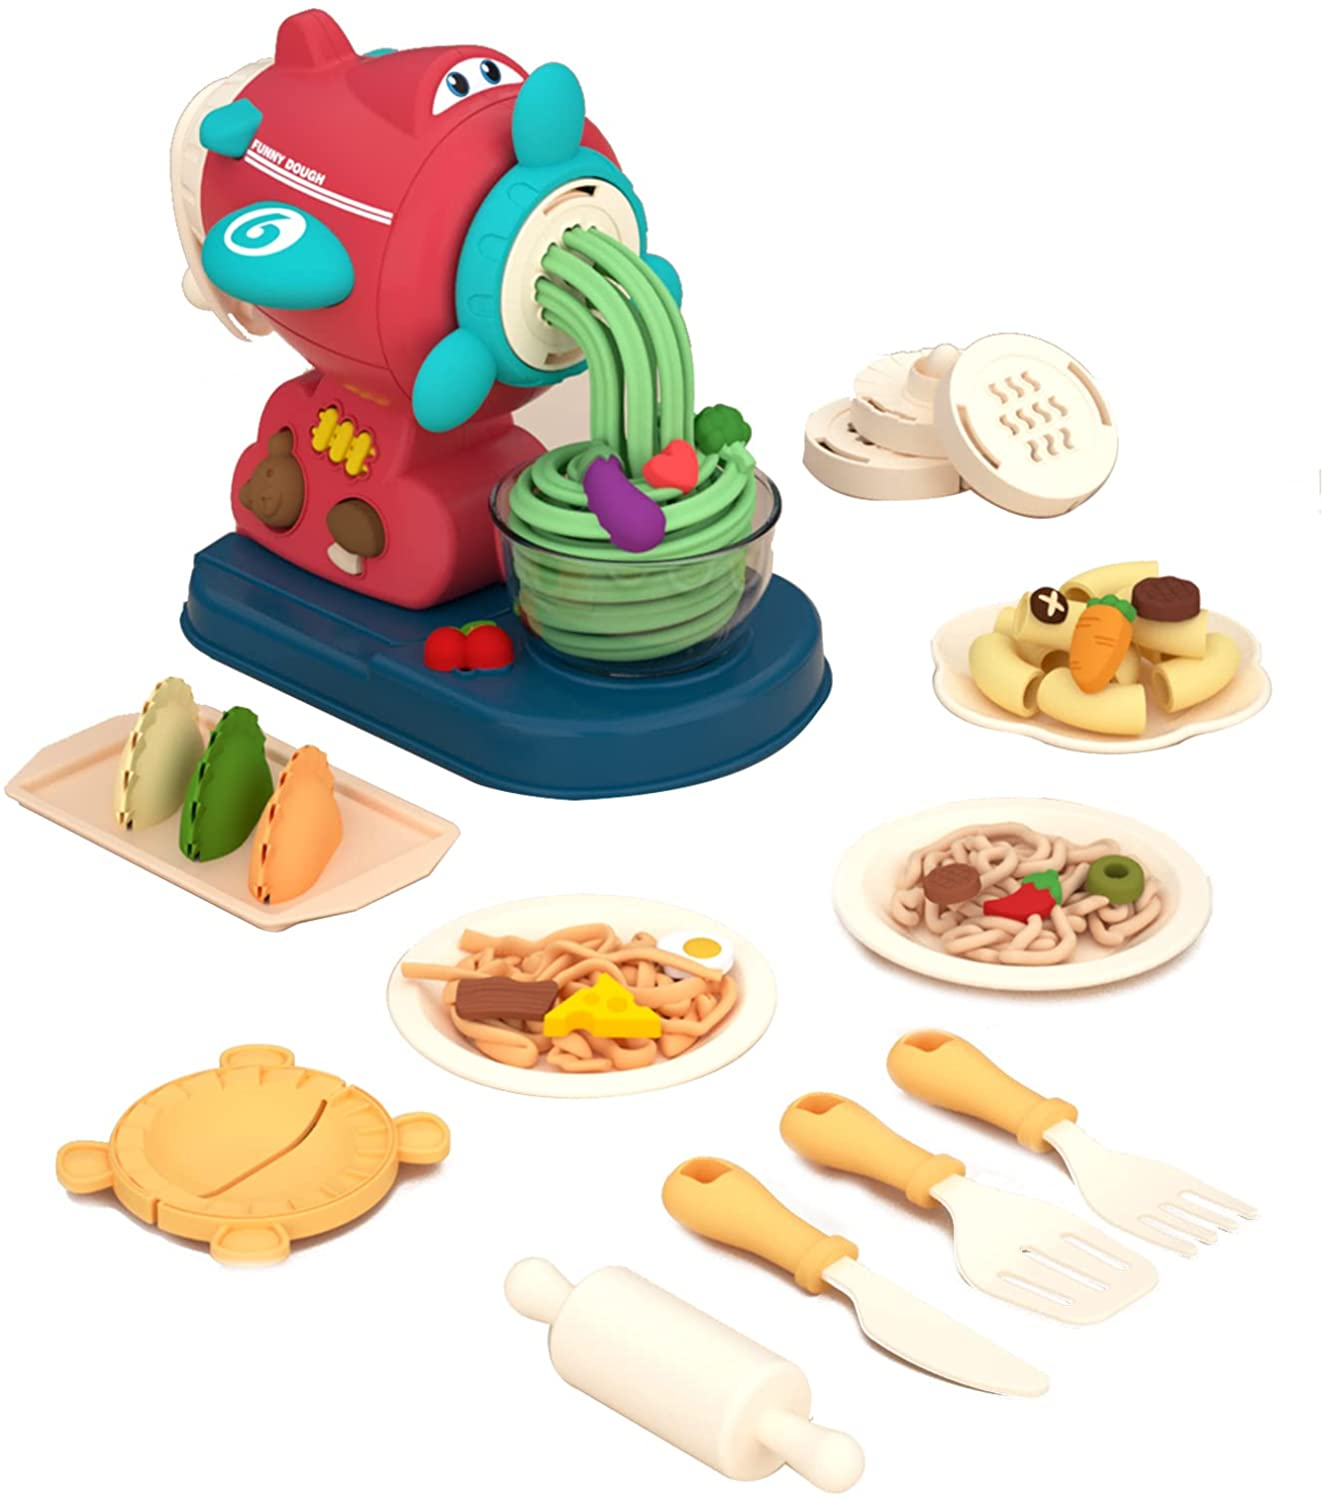 Play Dough Accessories Starter Set, Aircraft Noodle Pasta Maker, Fake  Flowers Etc Play Kitchen Creations Playset